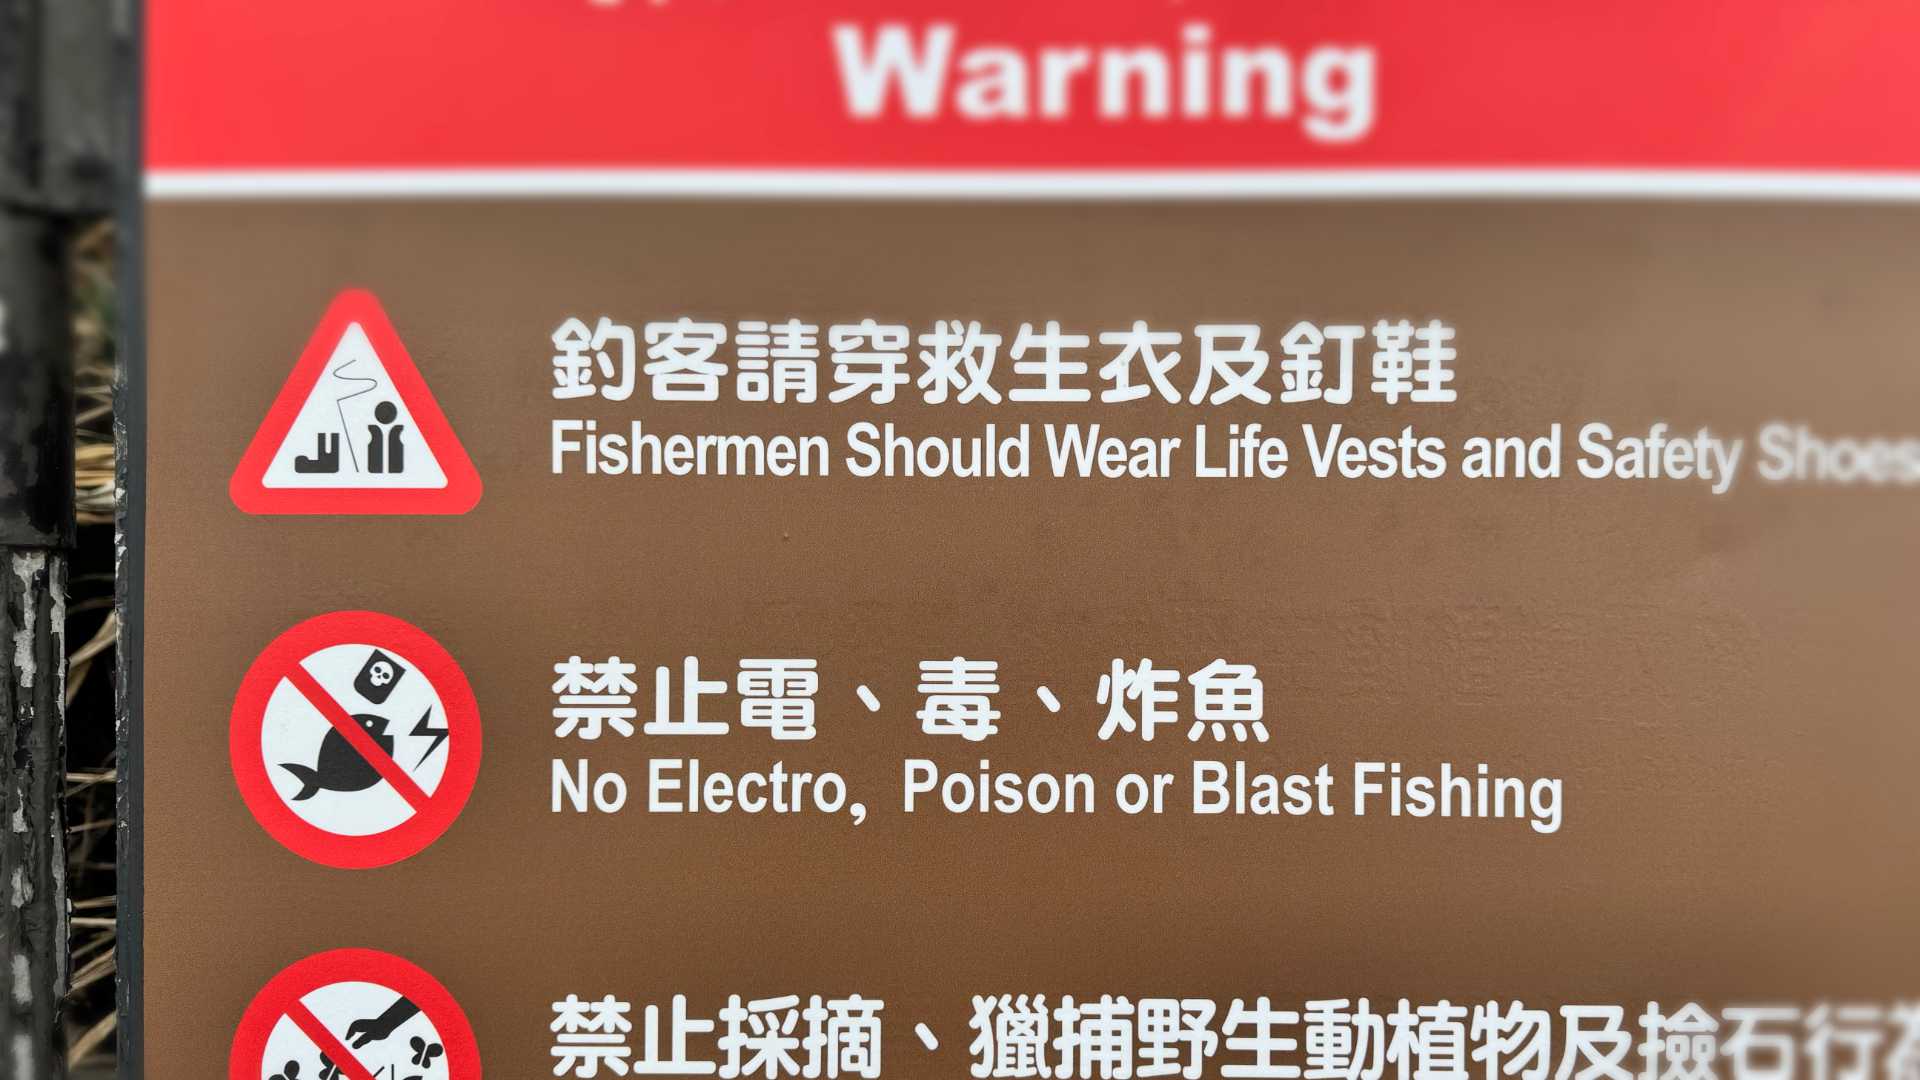 A warning sign that includes the line ‘No Electro, Poison or Blast Fishing‘.